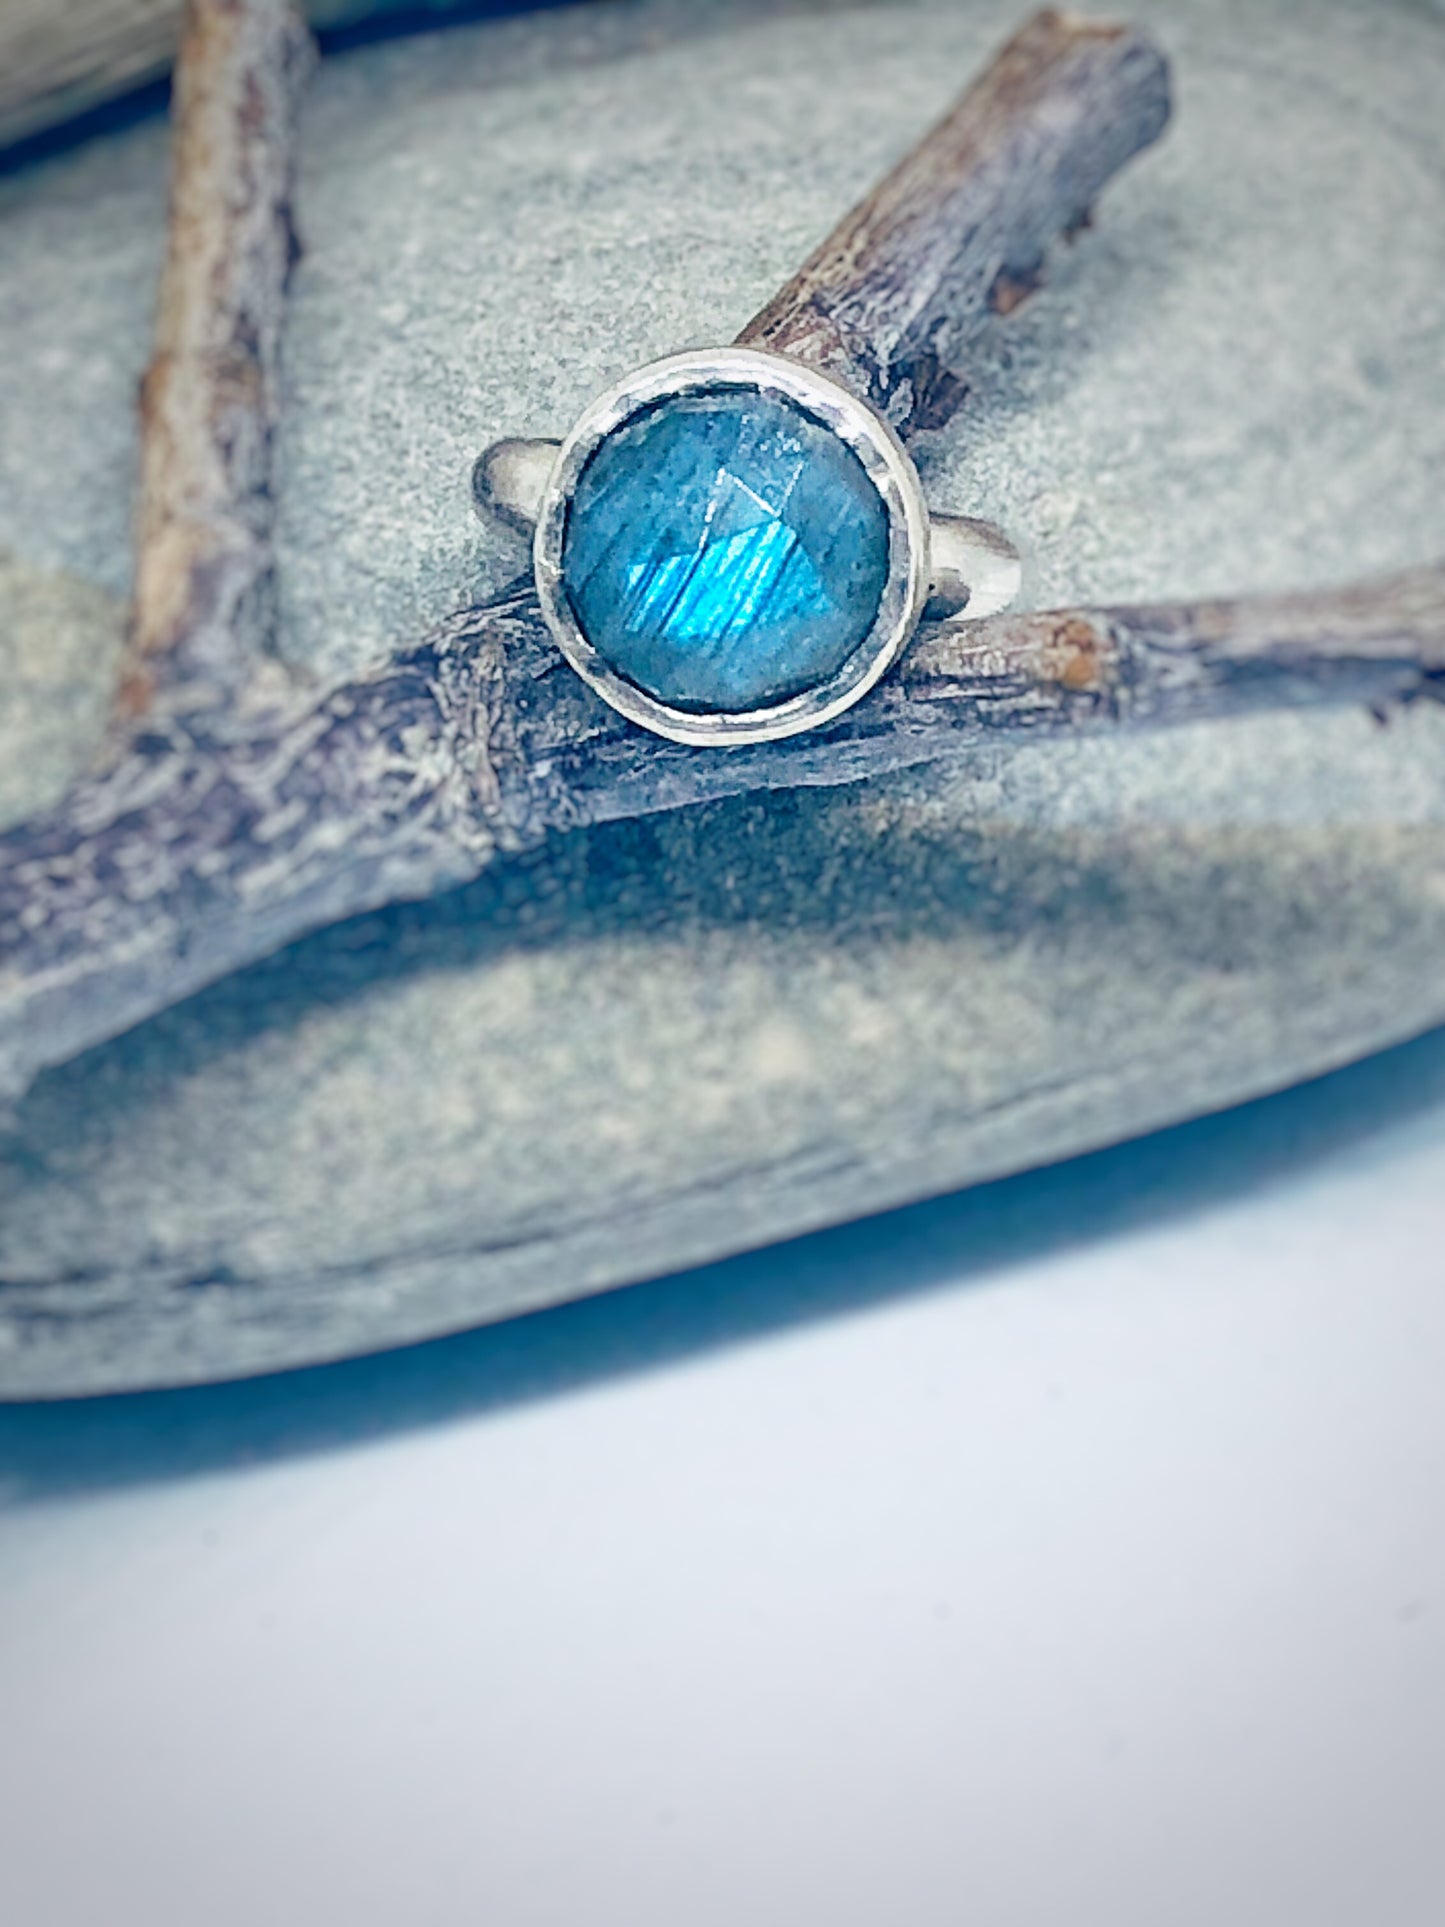 Blue Jean - Labradorite and Sterling Silver Ring